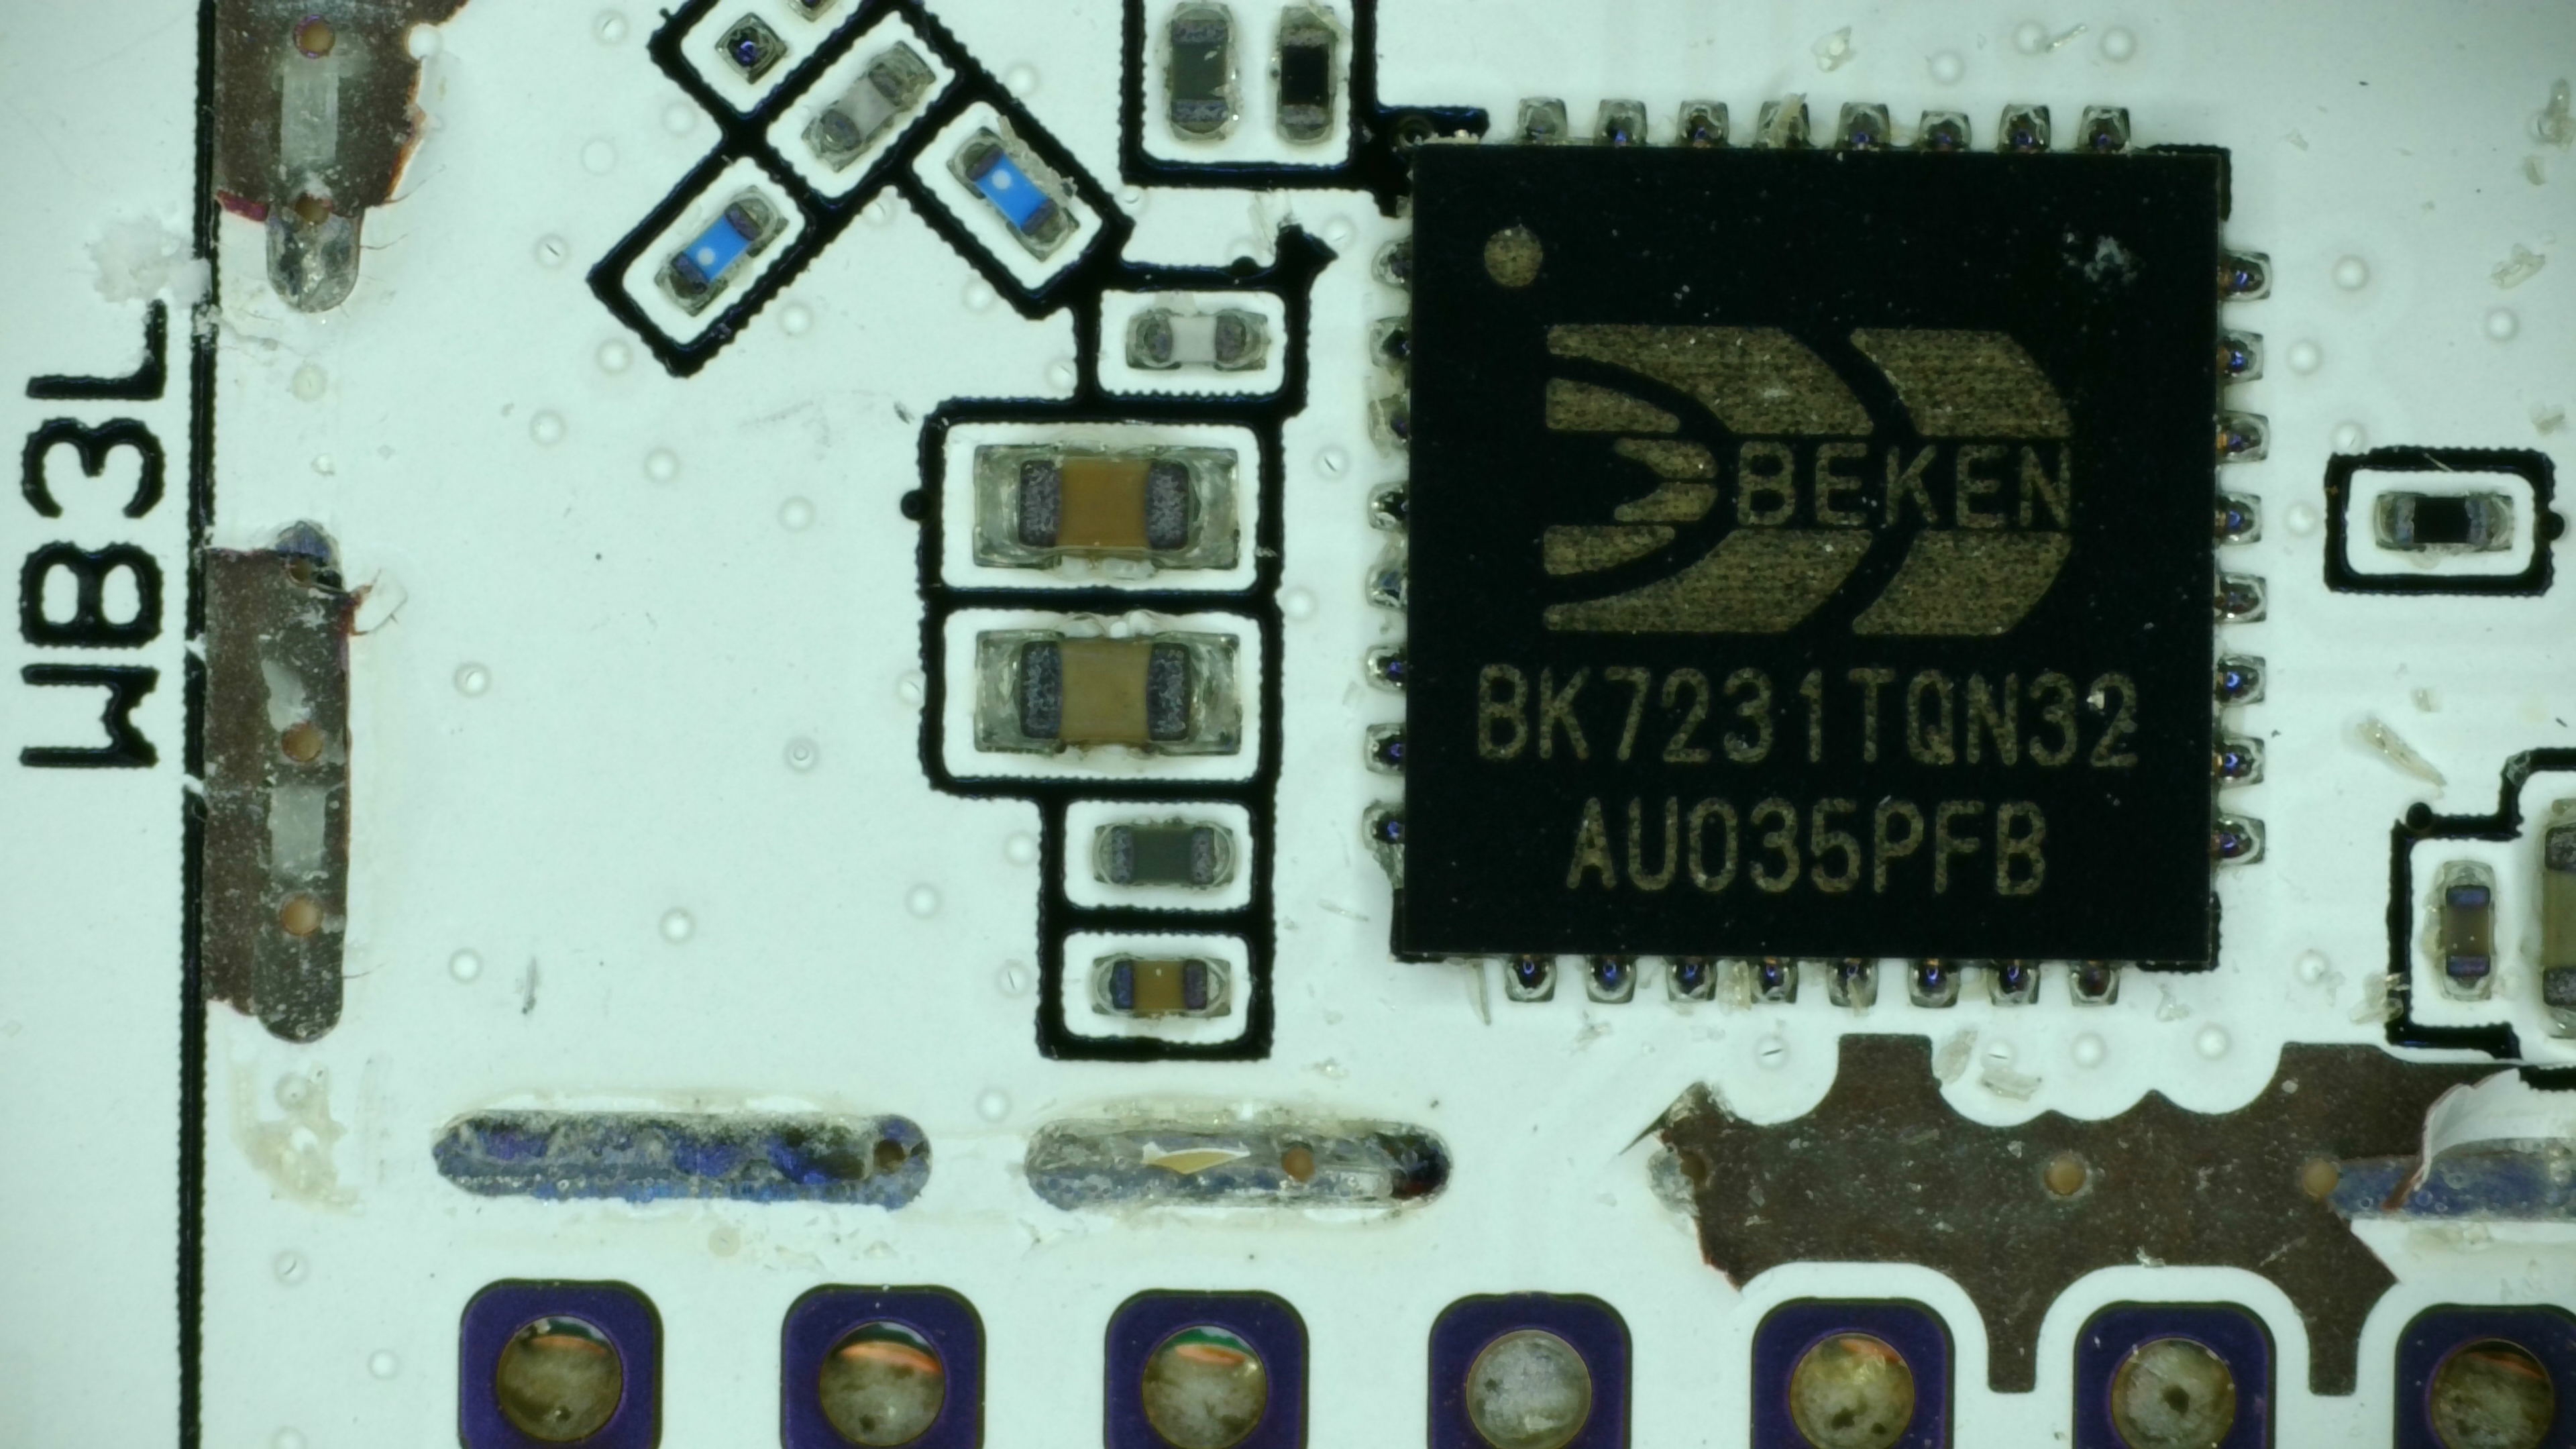 close up of the module with the chip mentioned